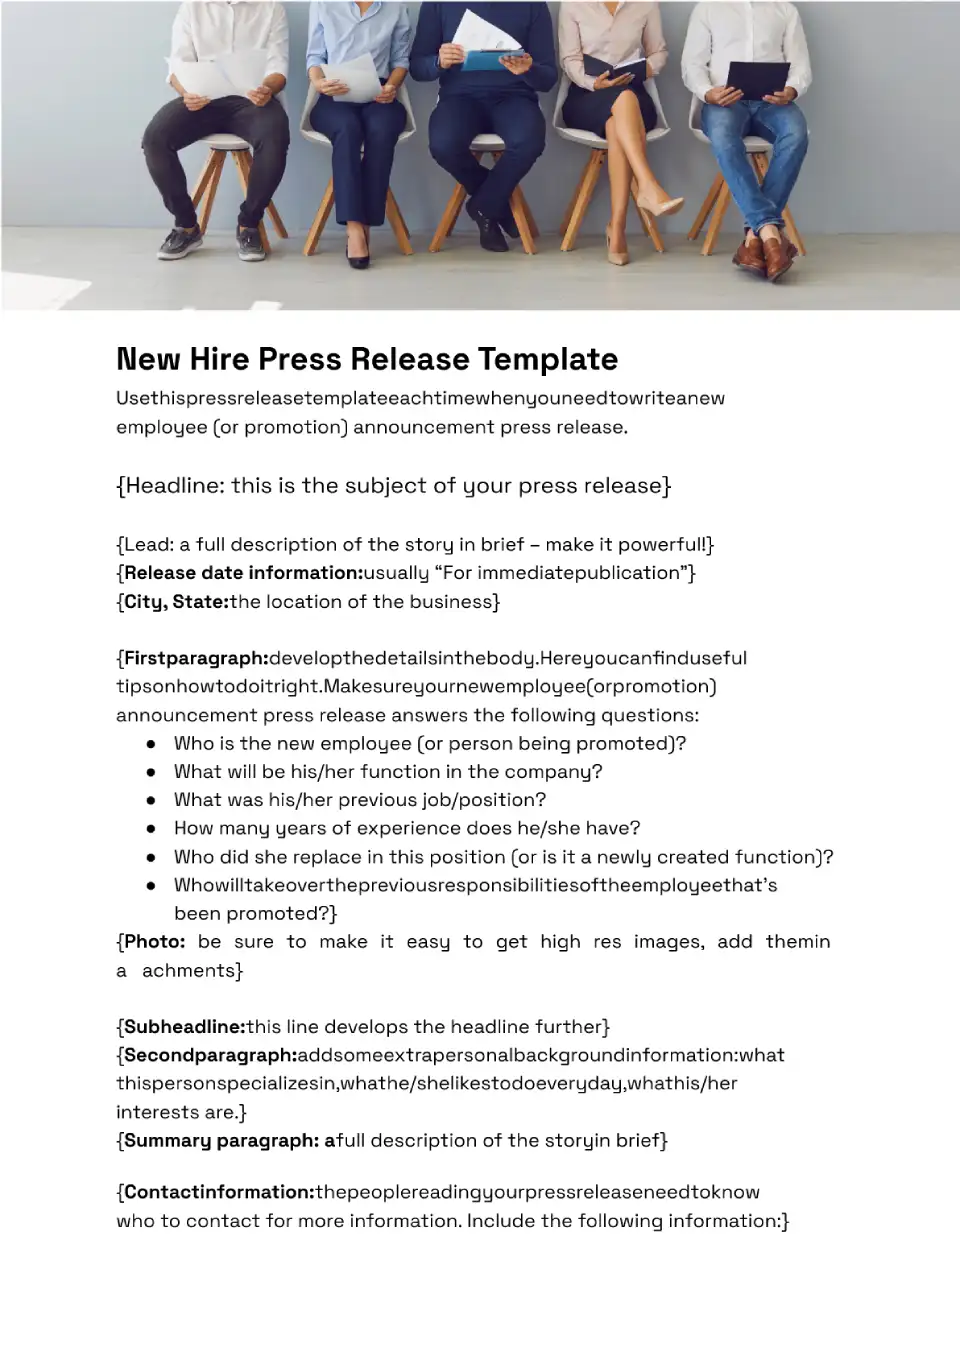 New Hire Press Release Template for Google Docs